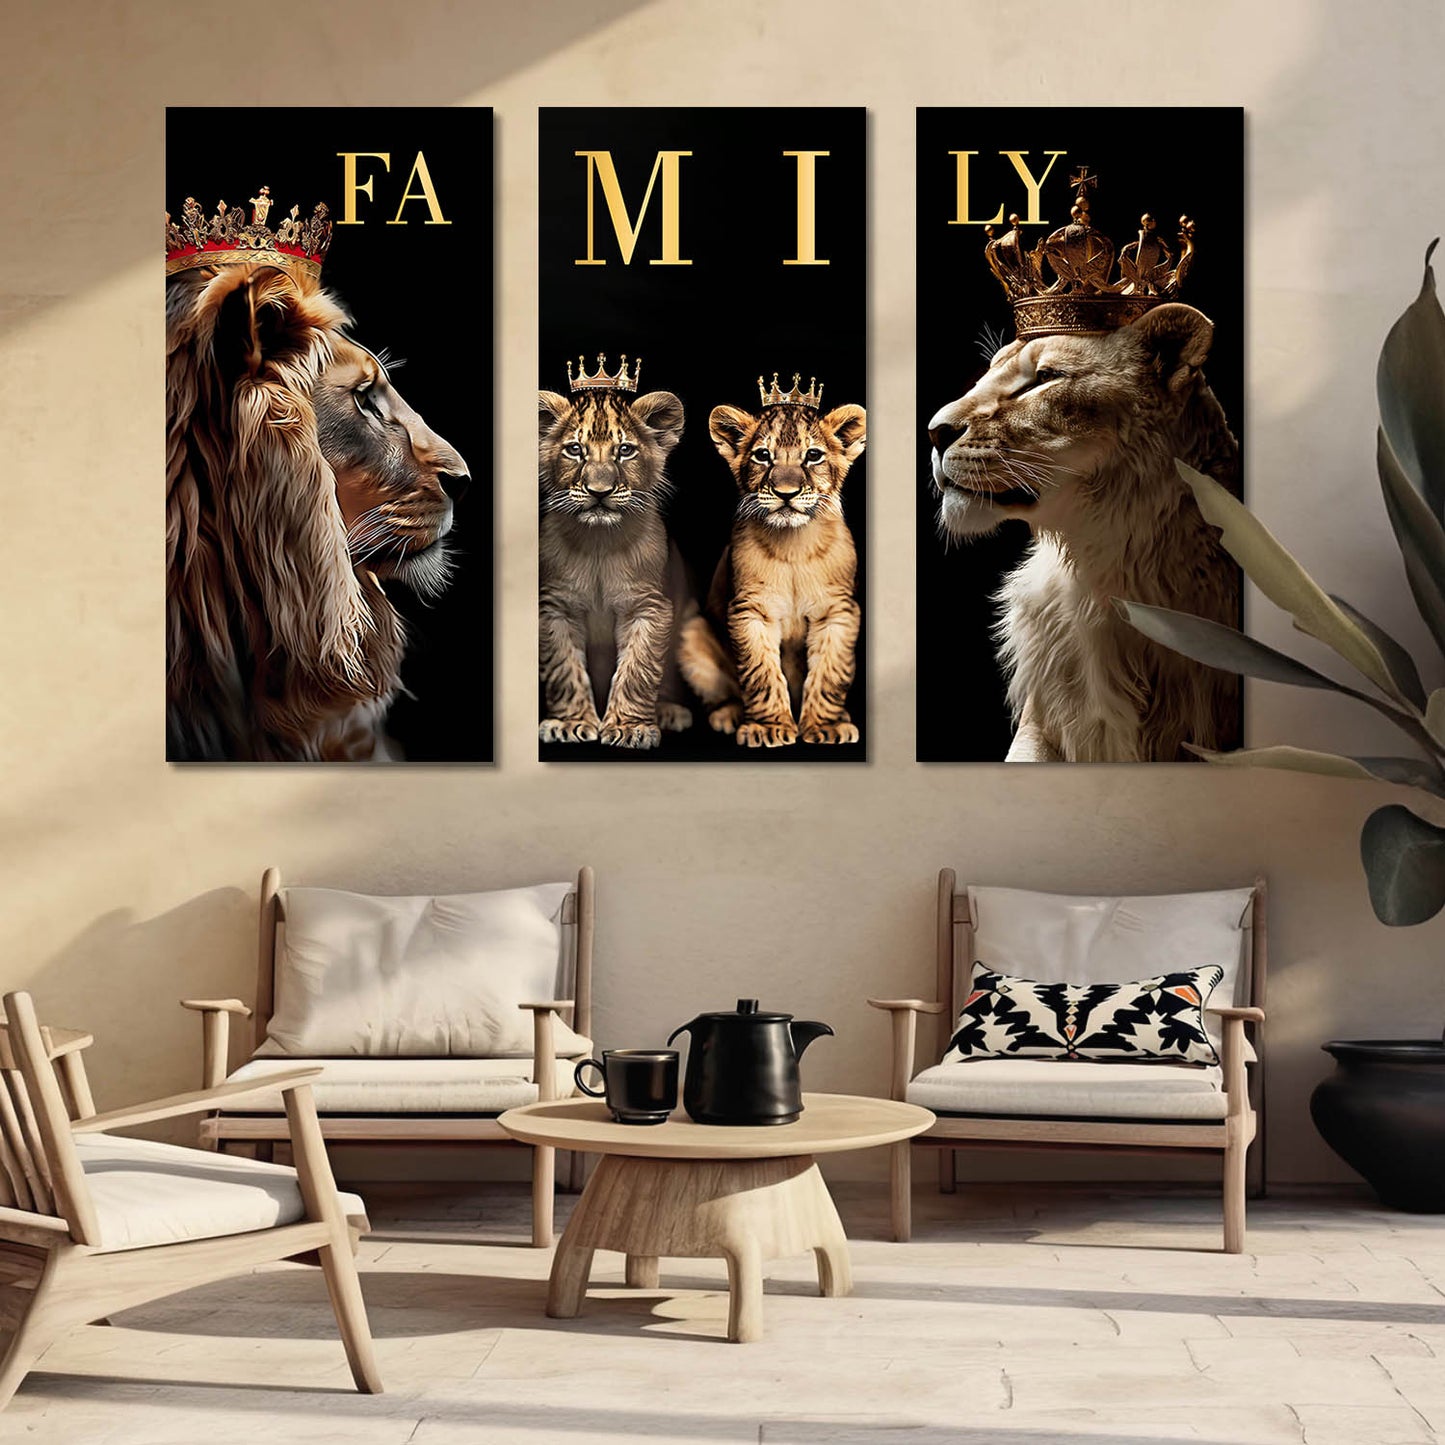 Lion Modern Wall Art Canvas, Wall Print for Living Room Wall Decoration